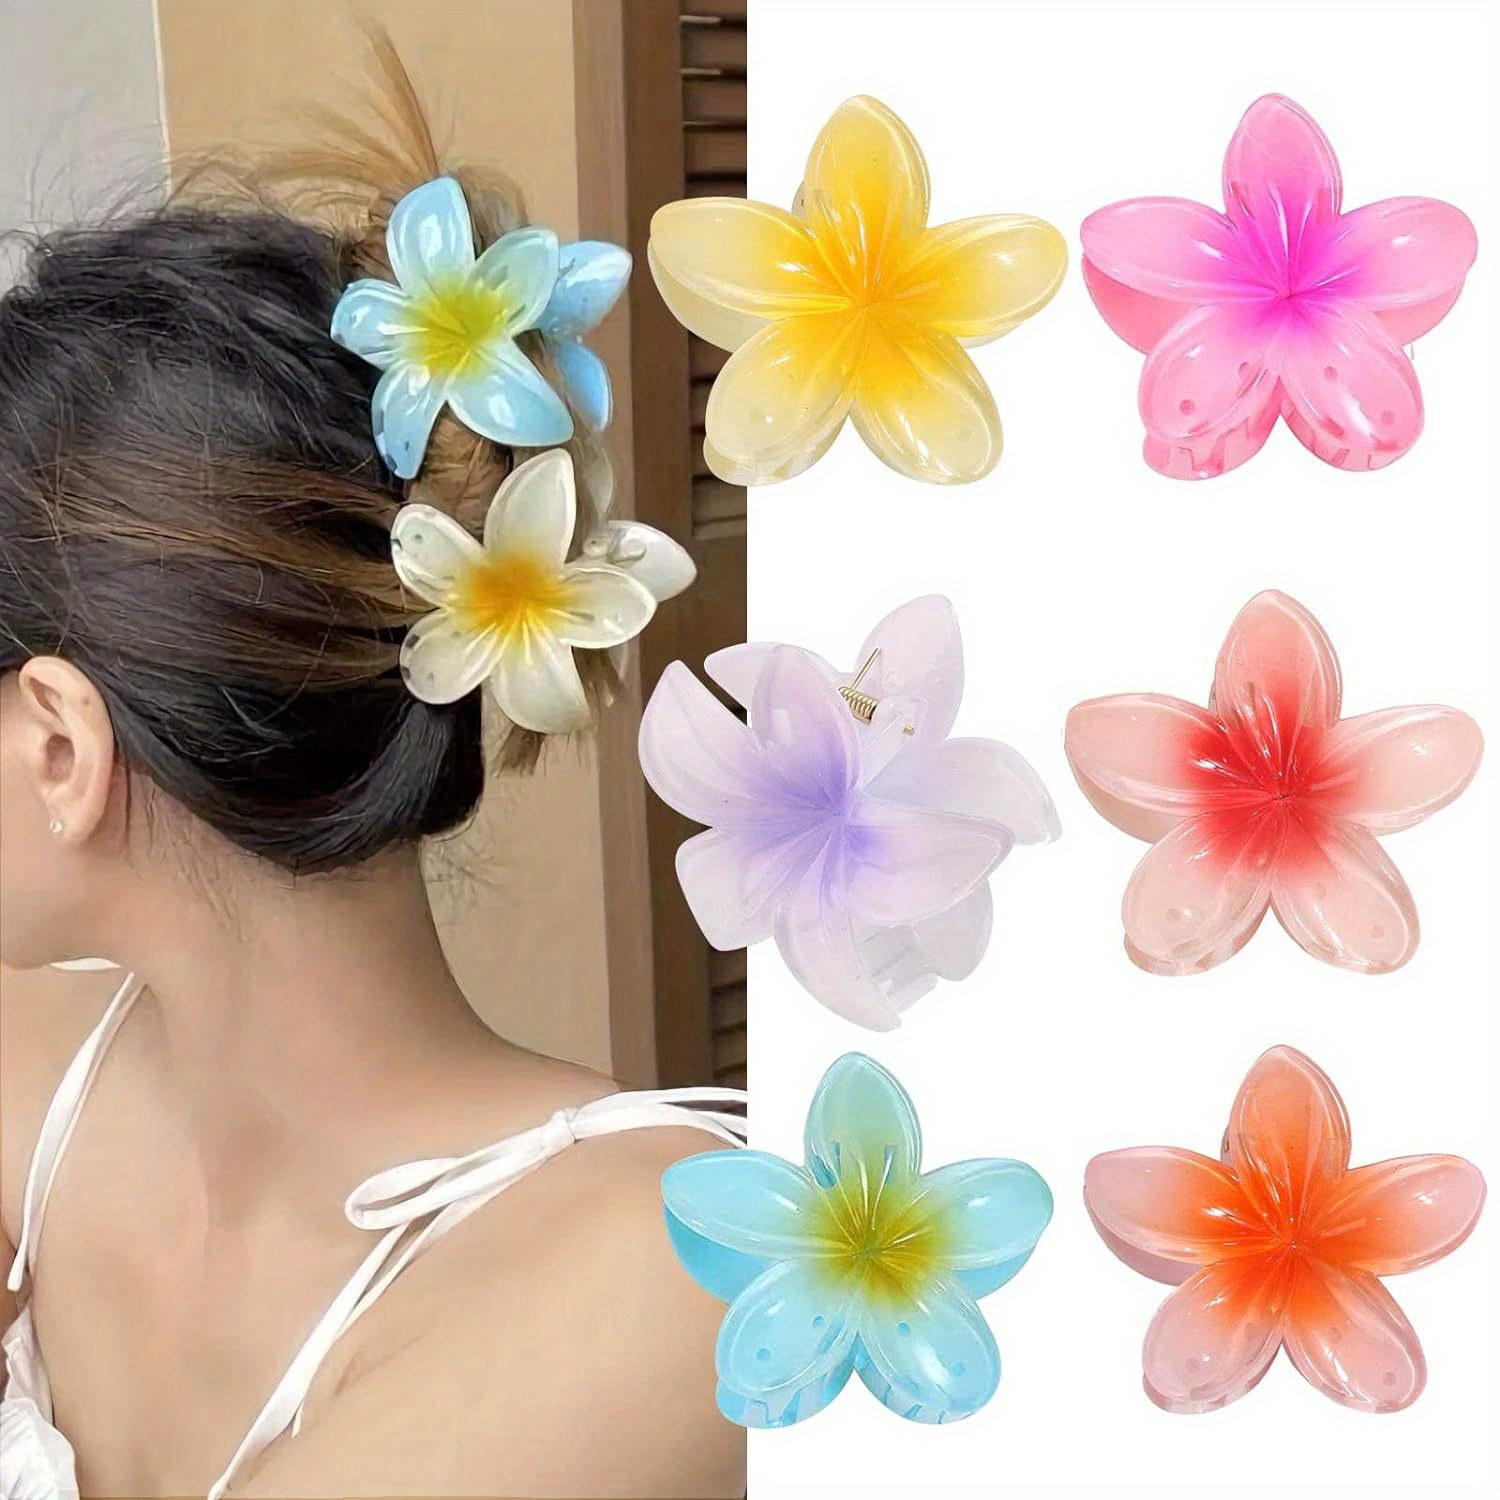 

blossom Grip" Elegant 6-piece Flower Claw Clip Set - Non-slip, Strong Hold Hair Accessories For Women & Girls, Versatile For All Hair Types, Vibrant Gradient Colors